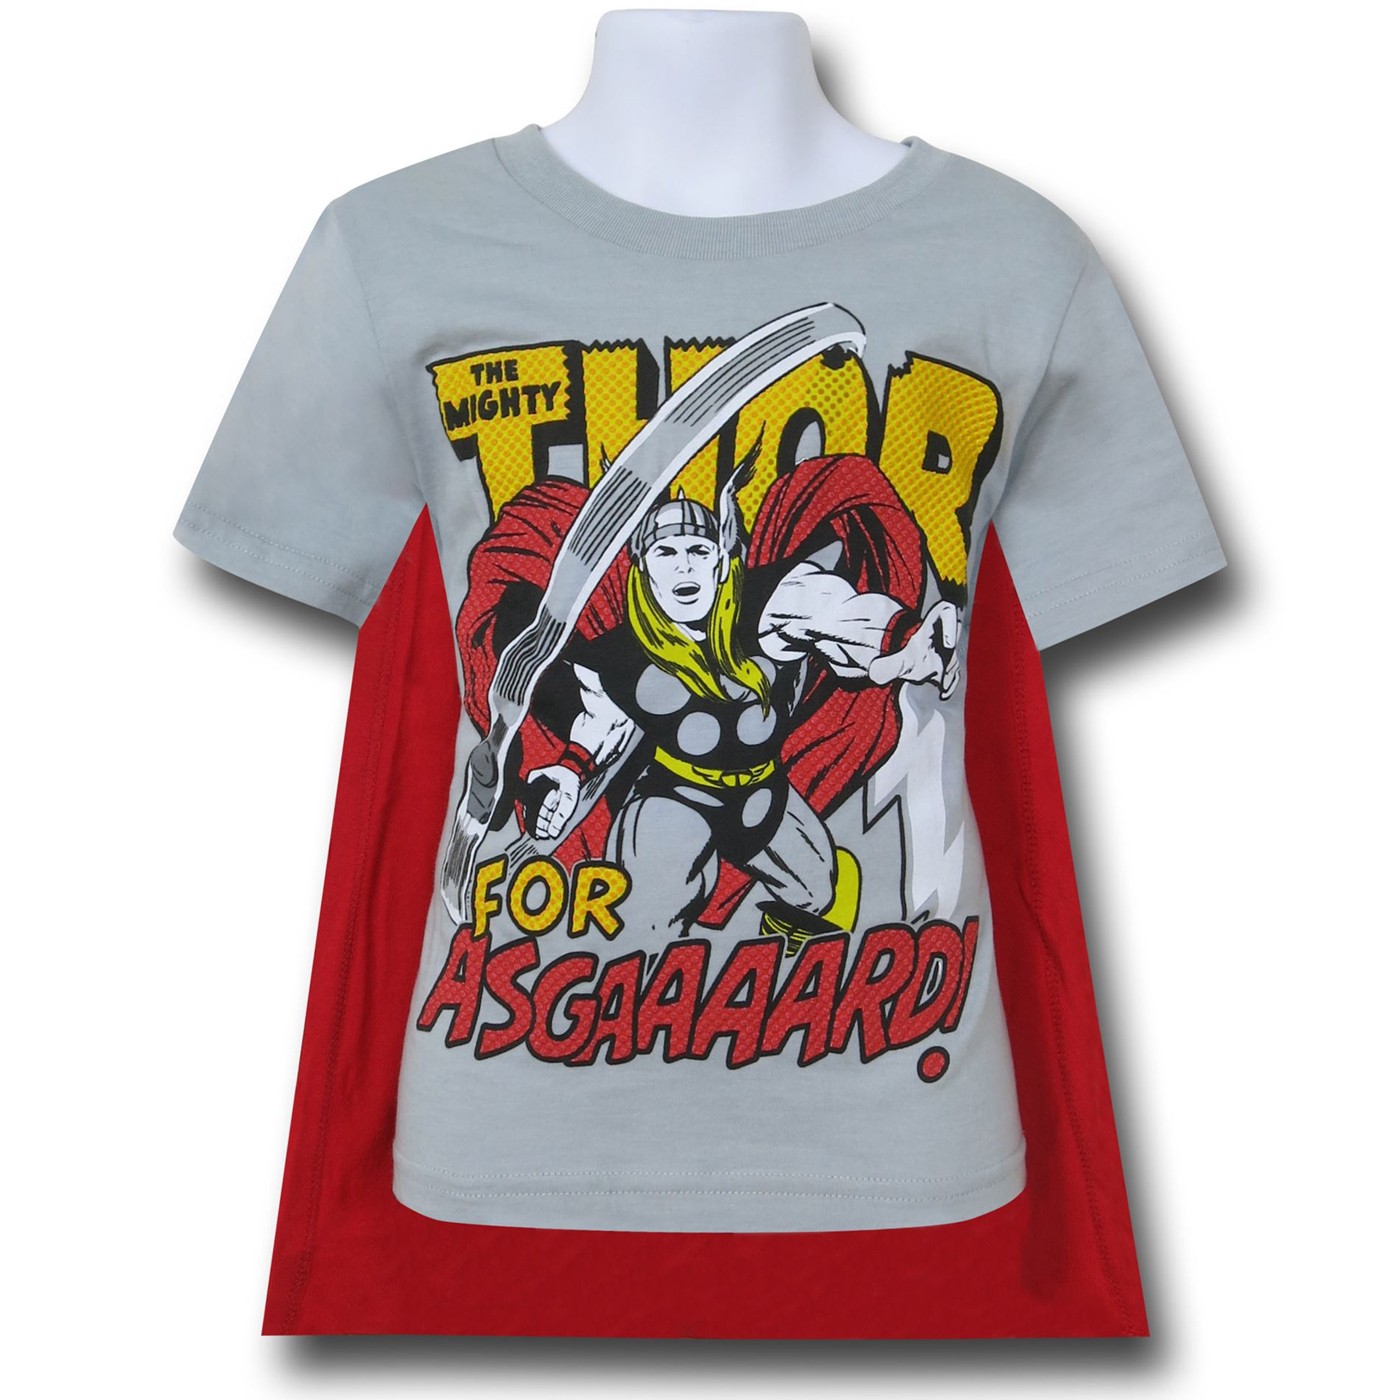 Thor For Asgaaard! Kids Caped T-Shirt